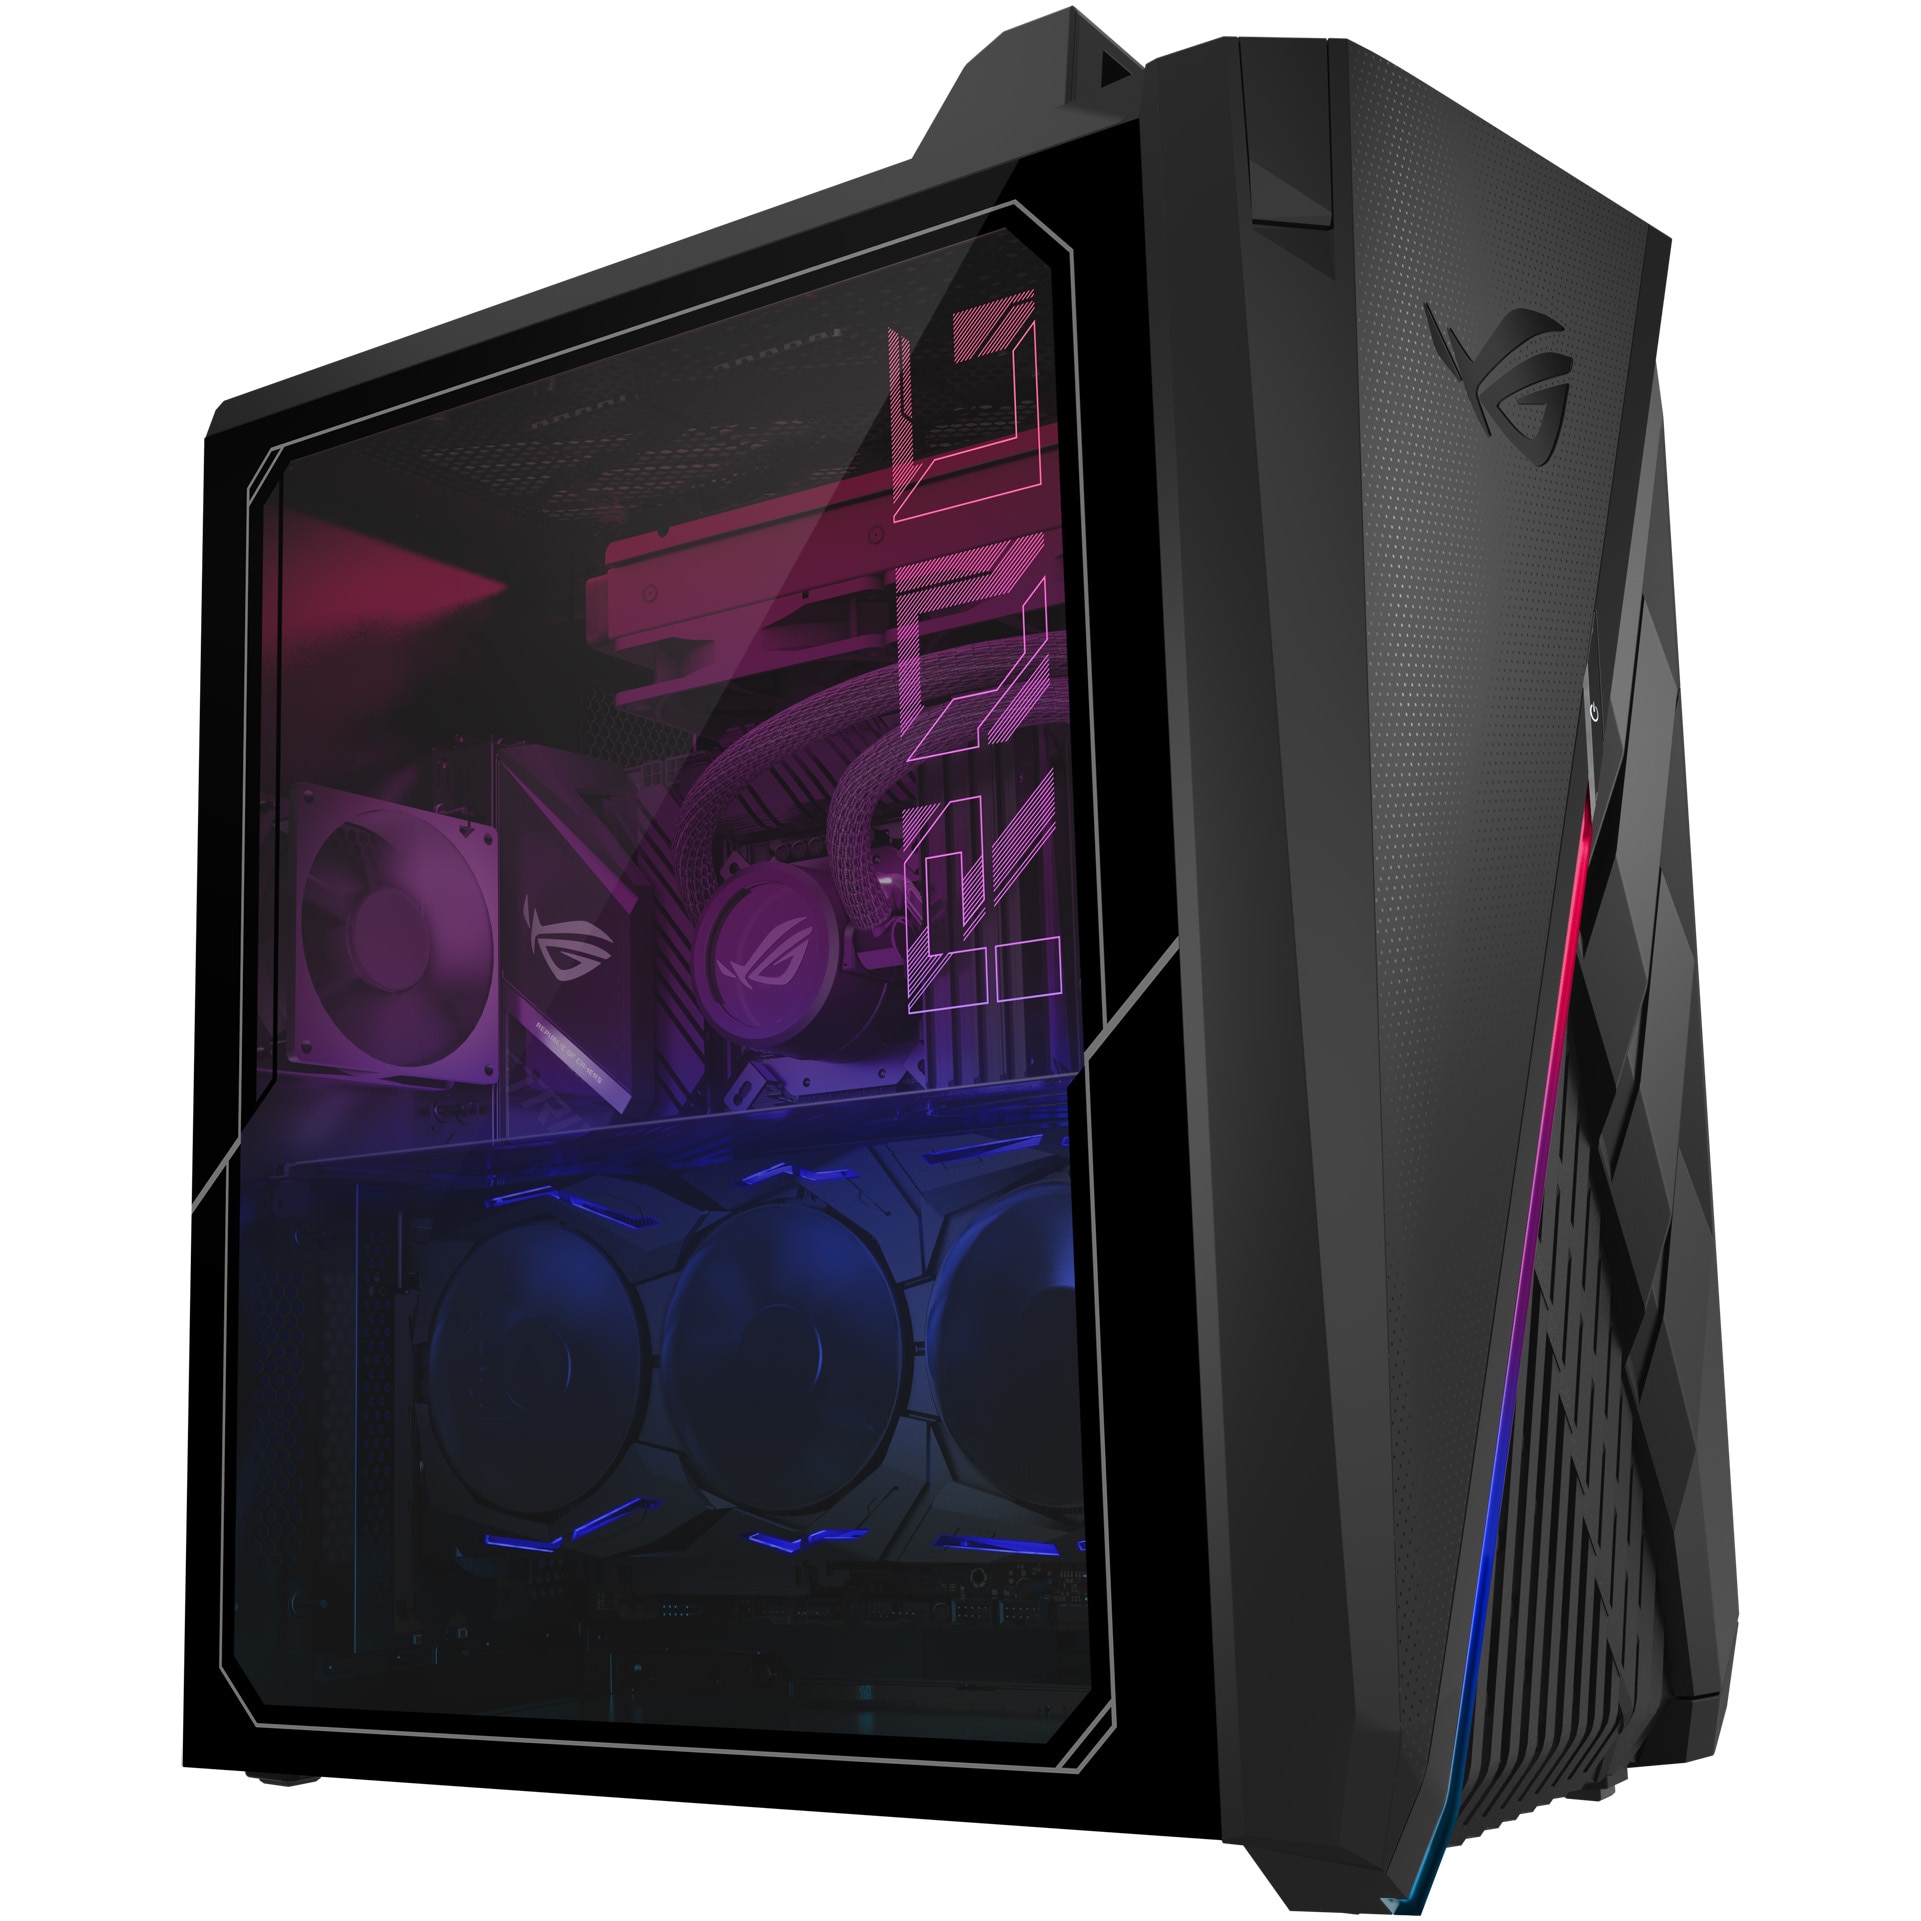 Asus ROG Strix Gaming Desktop, Core i7-12700(12 Cores, up to 4.90 GHz),  GeForce RTX 3070, 64GB RAM - 2TB SSD, WiFi 6, VR Ready, Pre-Built PC Tower